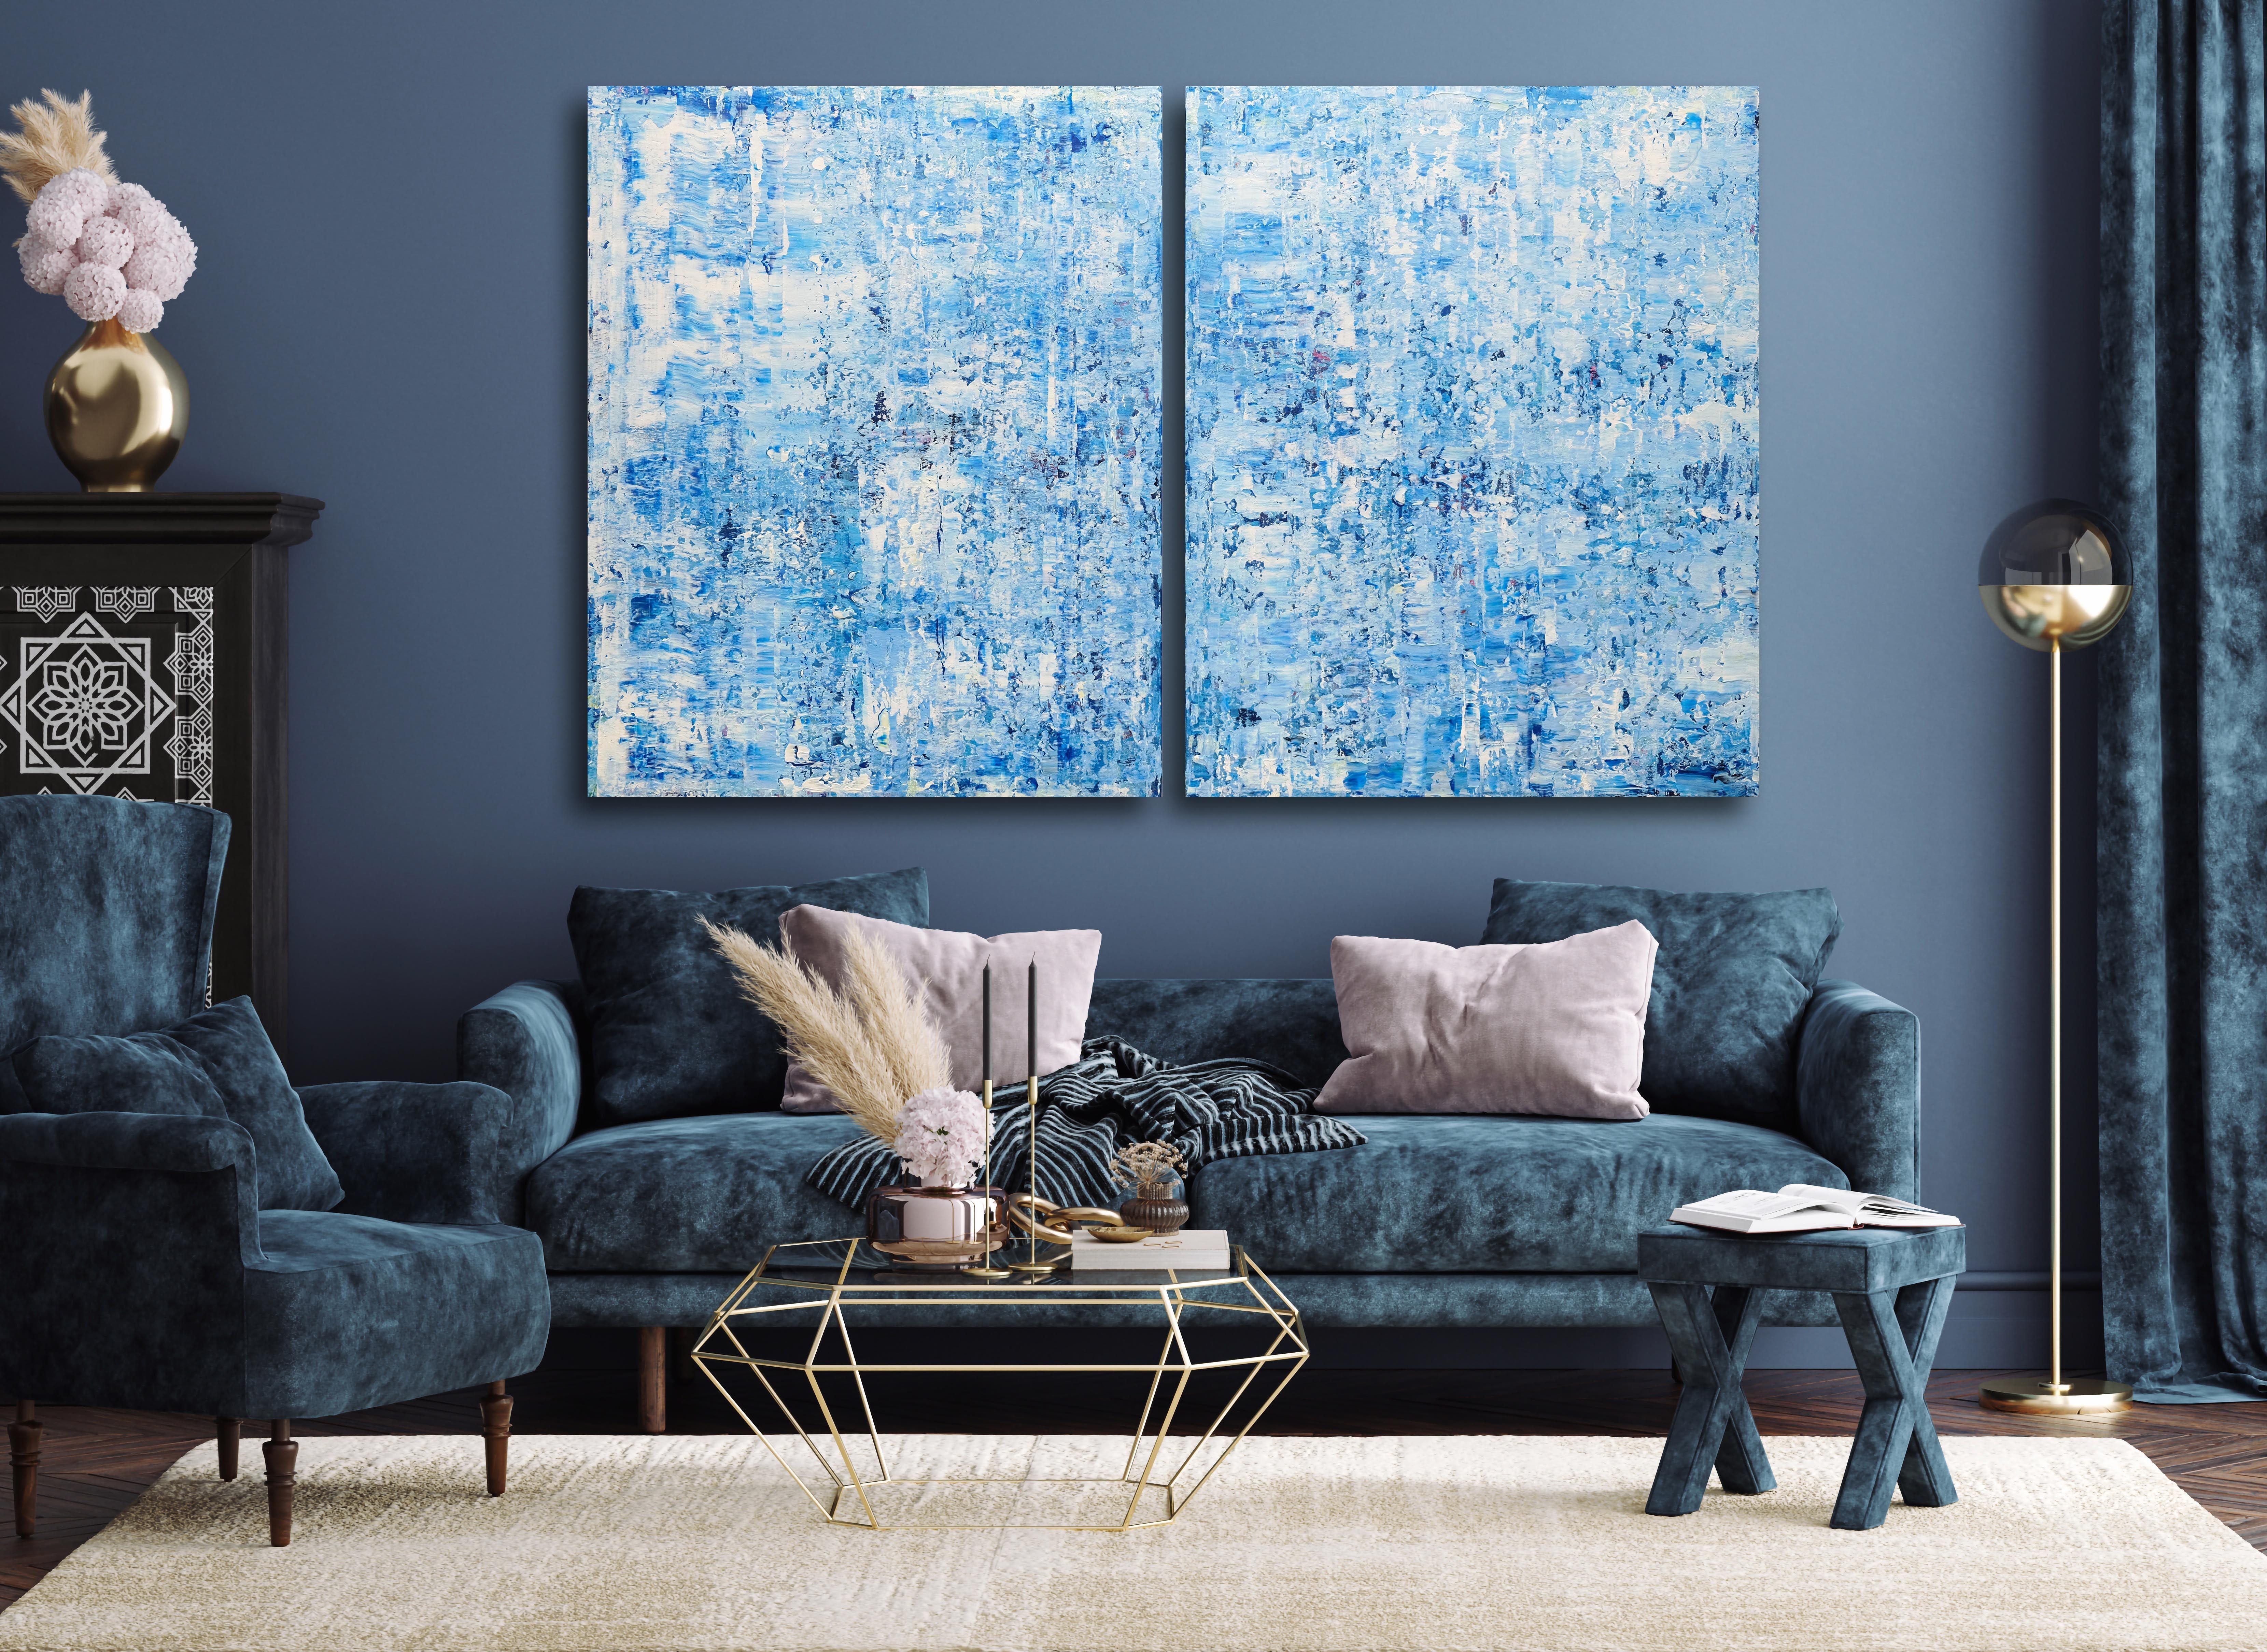 Dimensions of diptych: 162x100 cm â€“ 63,78x39,37 inches.  Dimensions of each: 81x100cm - 31,89x39,37 inches.  Large original abstract diptych painting.    * The artwork is signed on the back and includes a Certificate of Authenticity.  * The